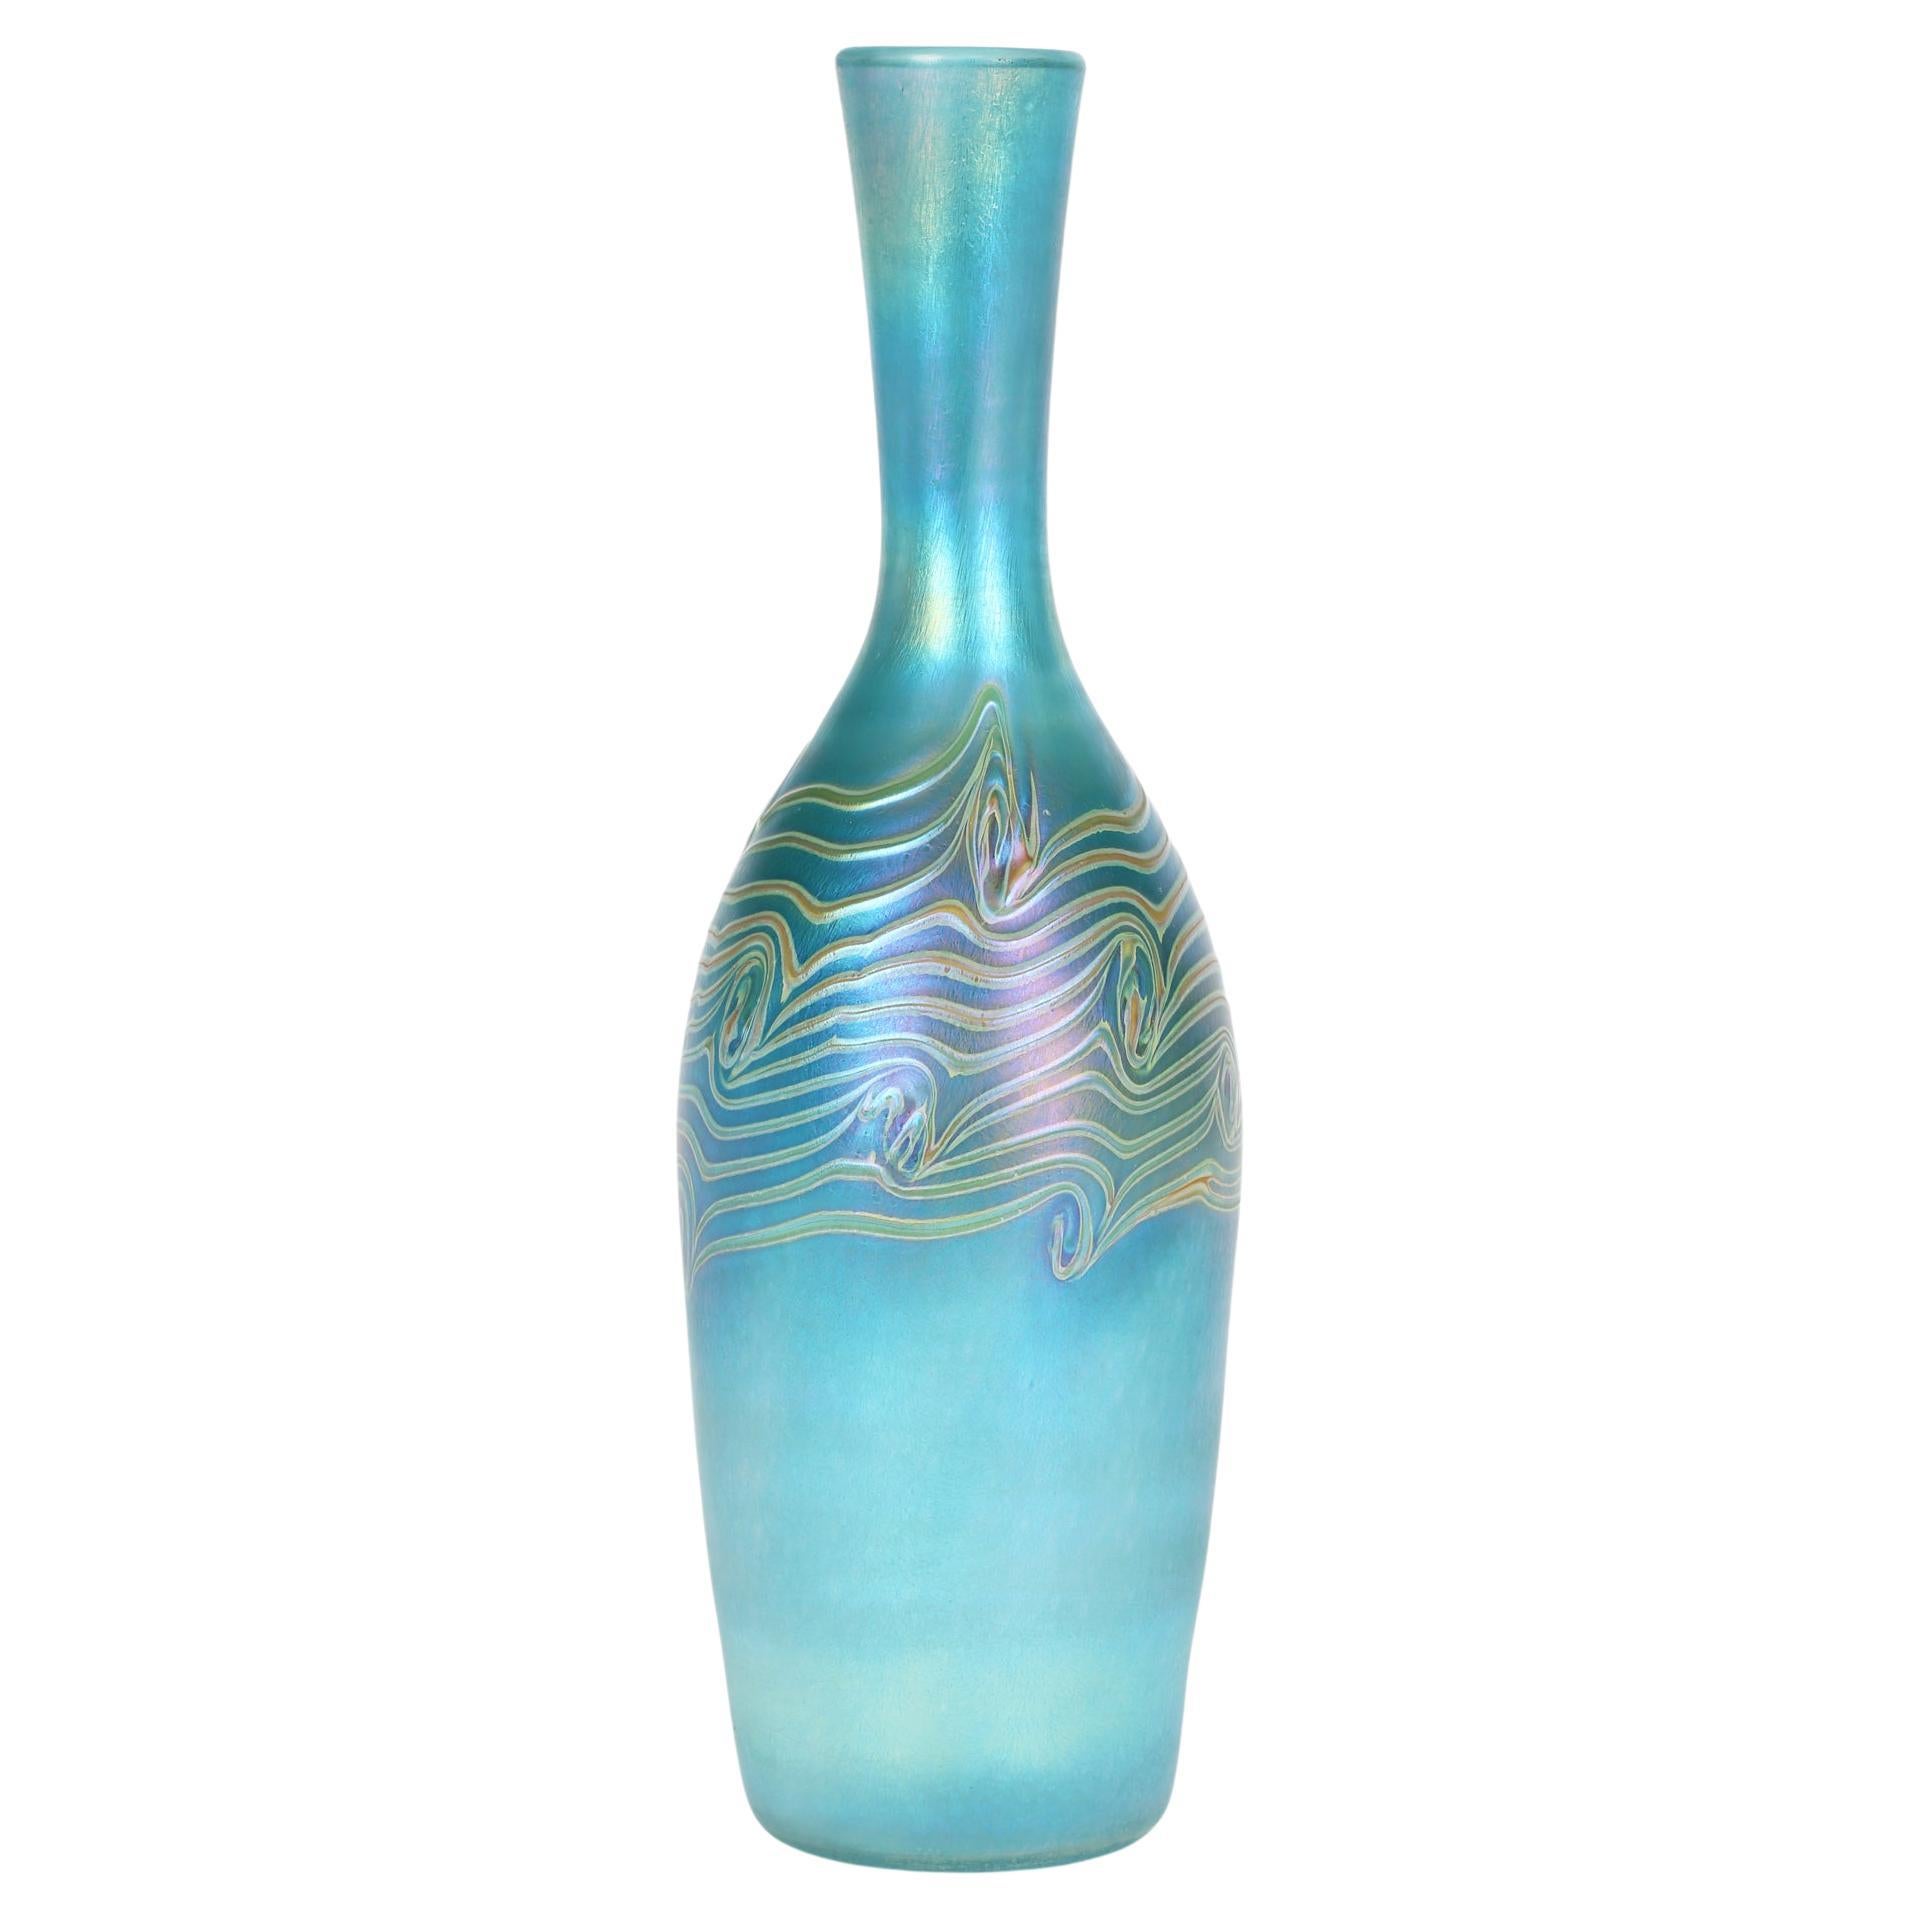 Iridescent Blue Bottle Shaped Art Glass Vase with Peacock Feather Trailing